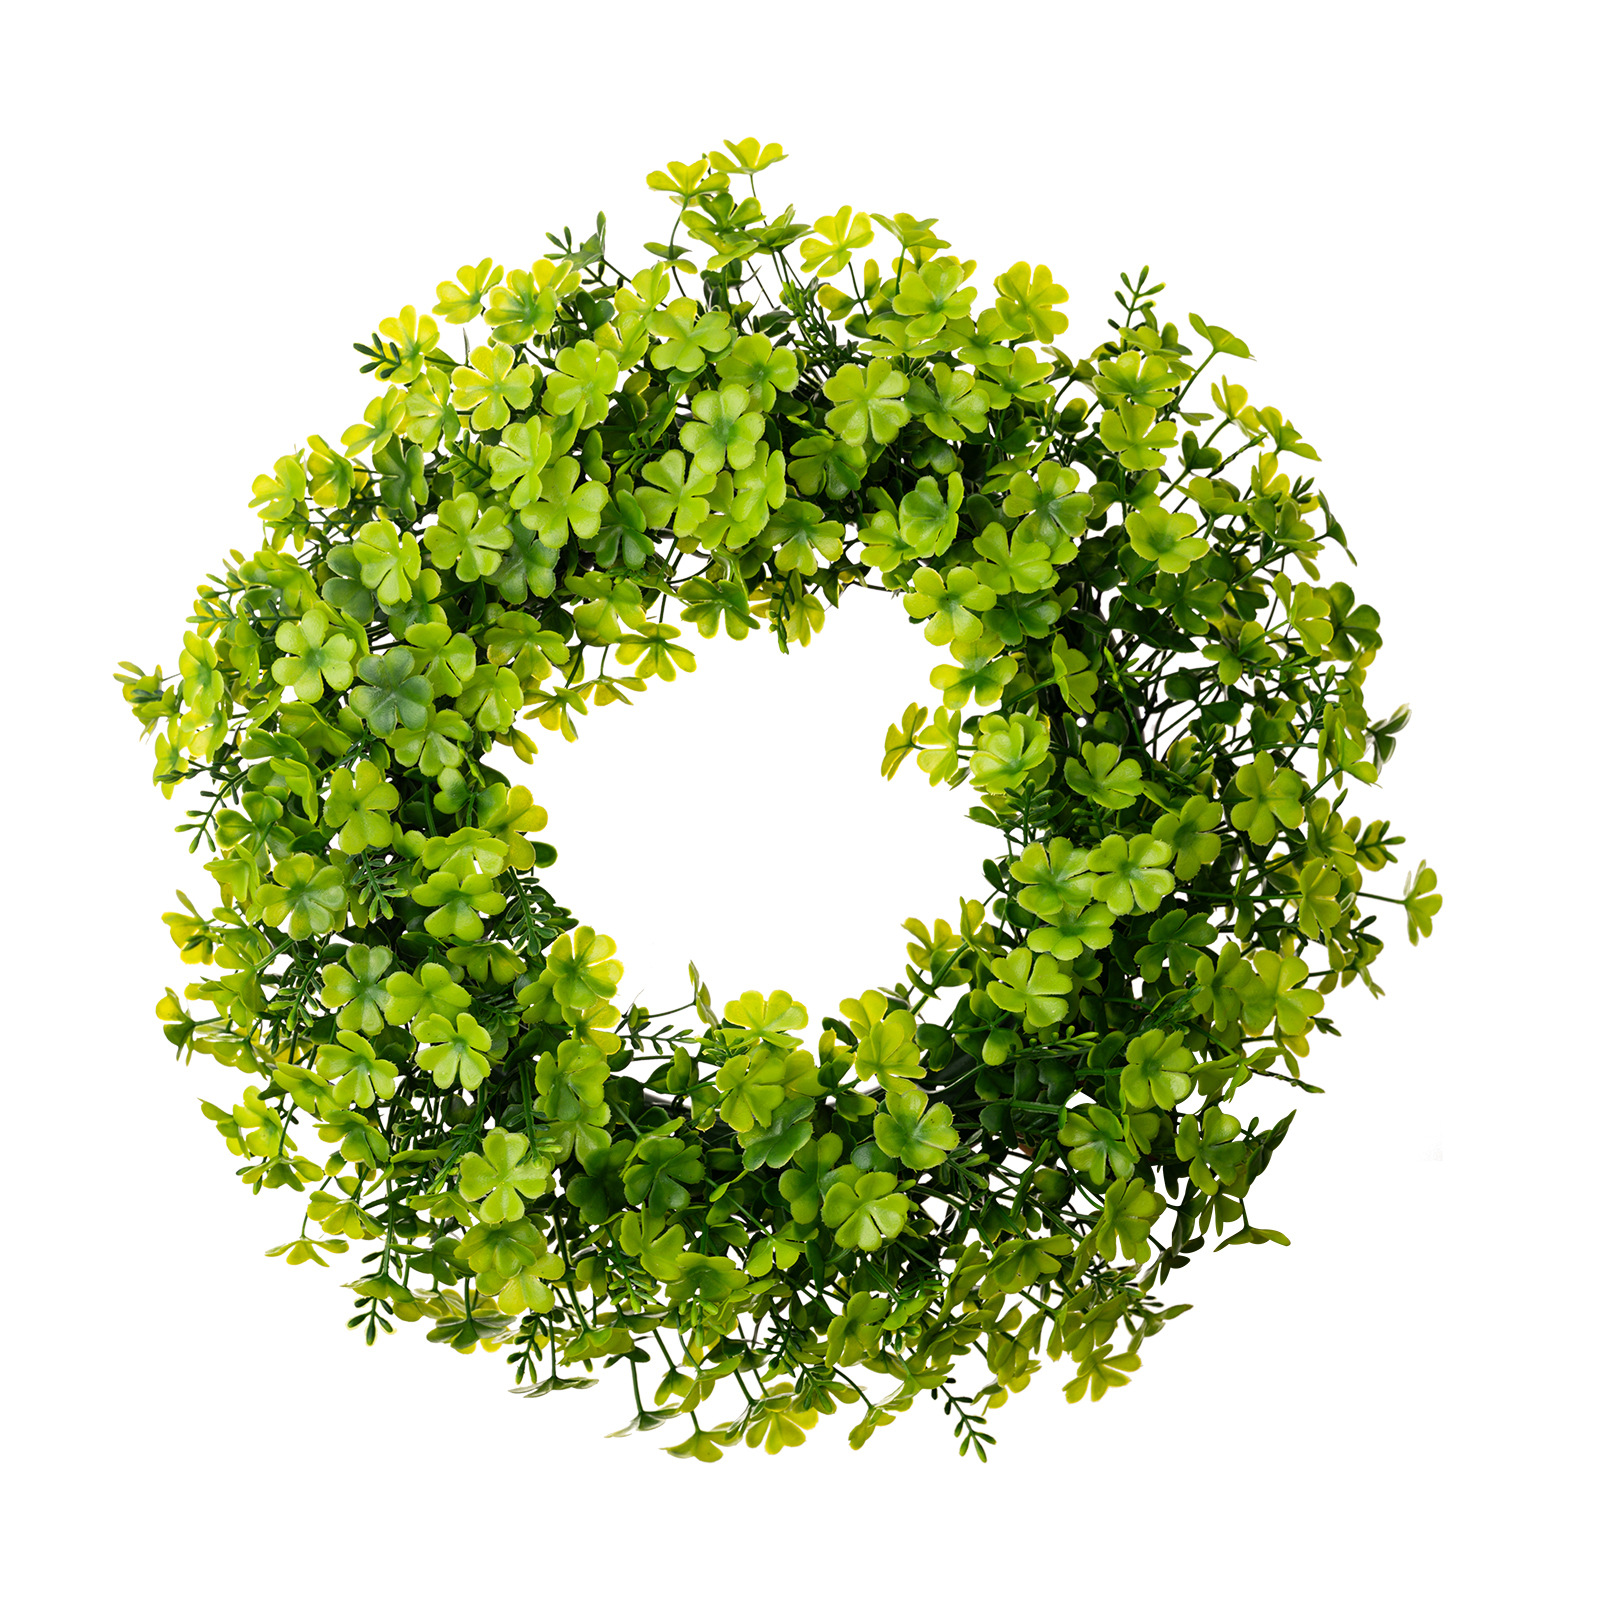 New St. Patrick's Day Decoration Supplies Four-Leaf Clover Green Garland Green Leaf Festival Welcome Door Hanging Wreath